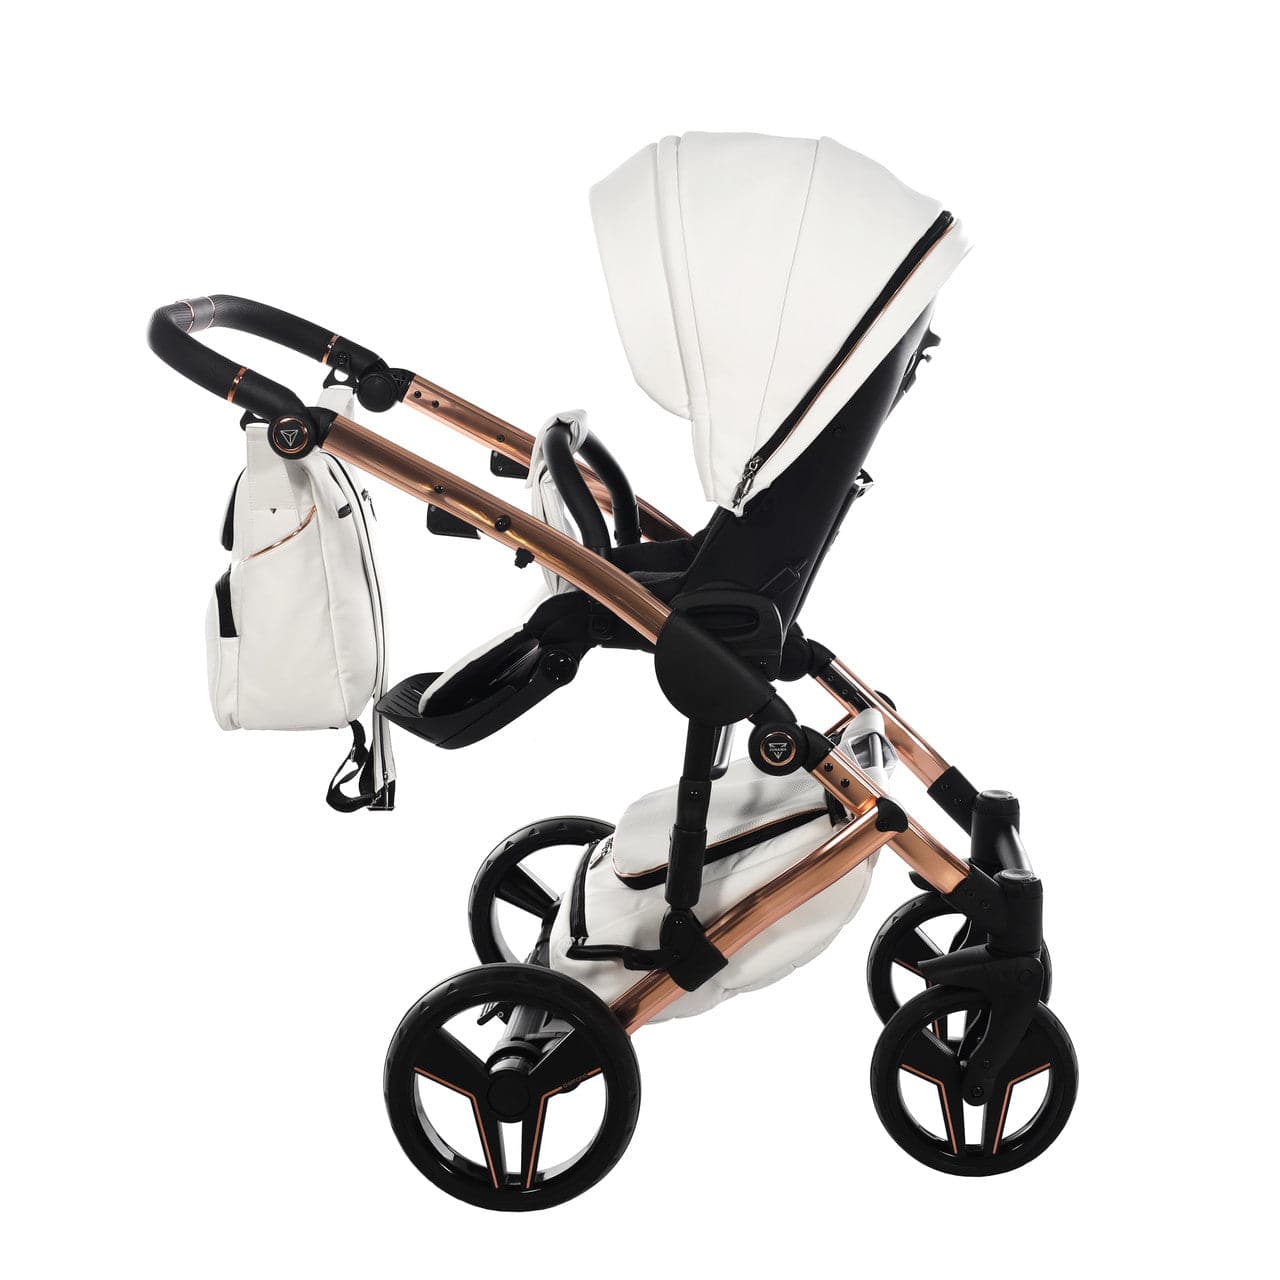 Junama S-Class 2 In 1 Pram - White - For Your Little One